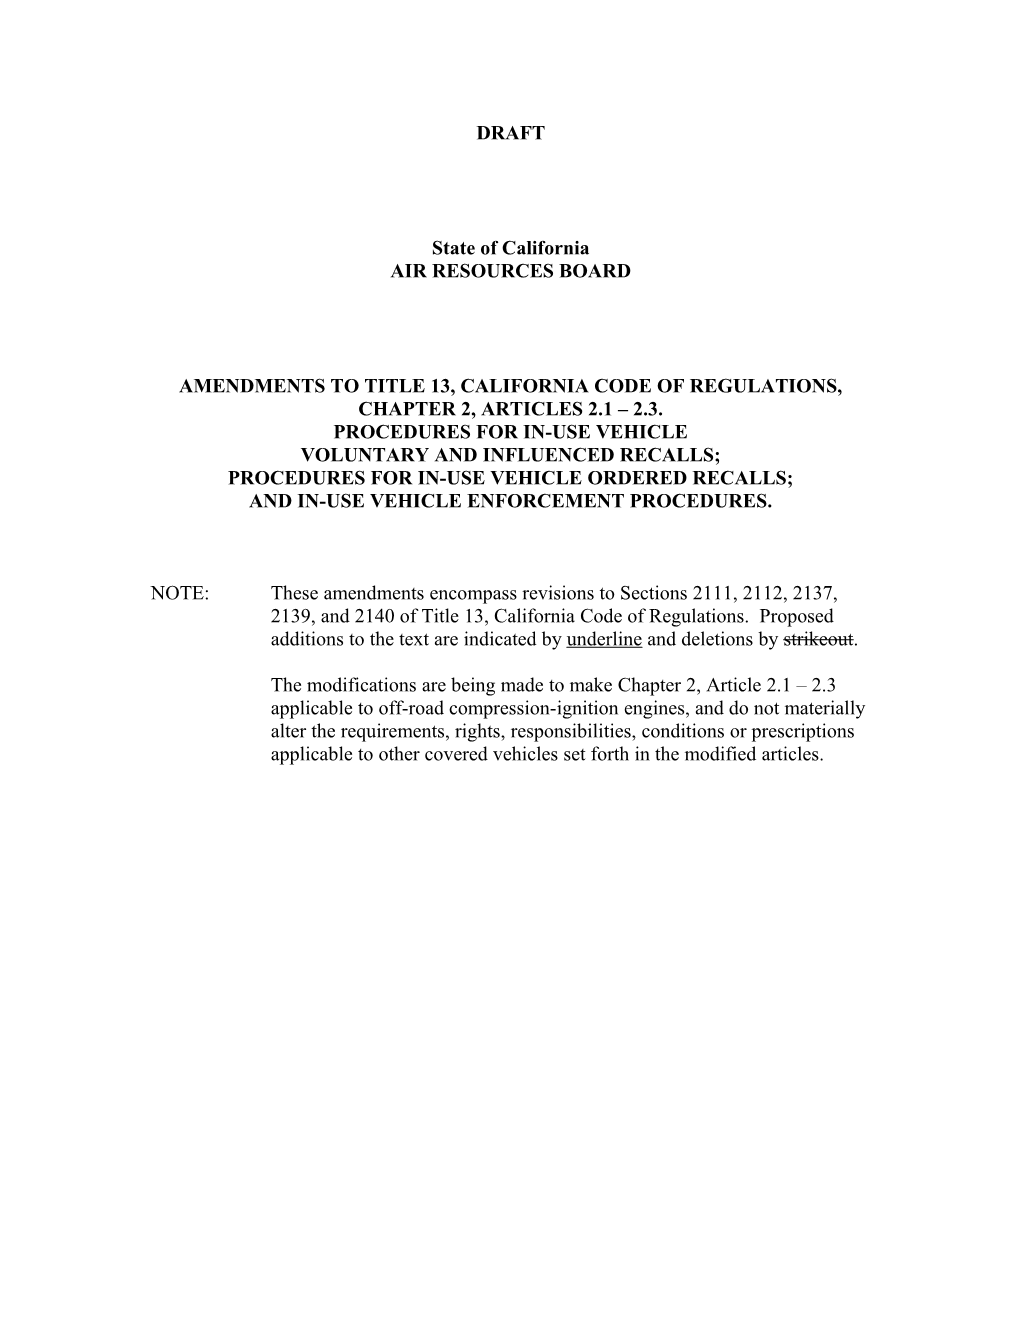 Amendments to Title 13, California Code of Regulations, Chapter 2, Articles 2.1 2.3